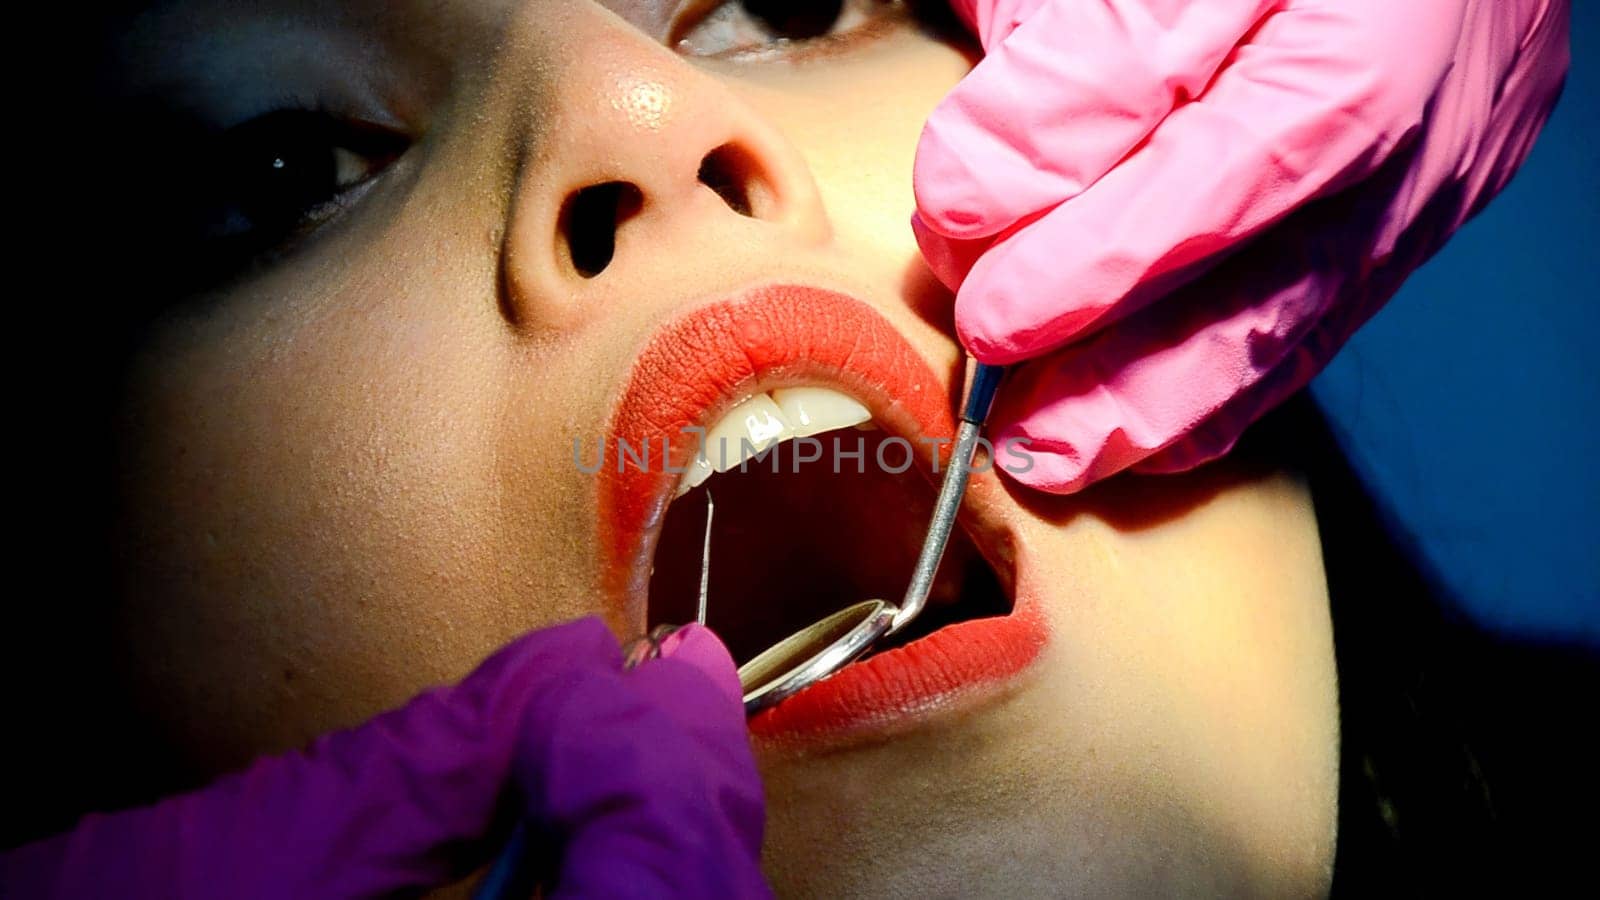 Close-up dental examination in dentist's office with oral care and hygiene checkup for patient's tooth health